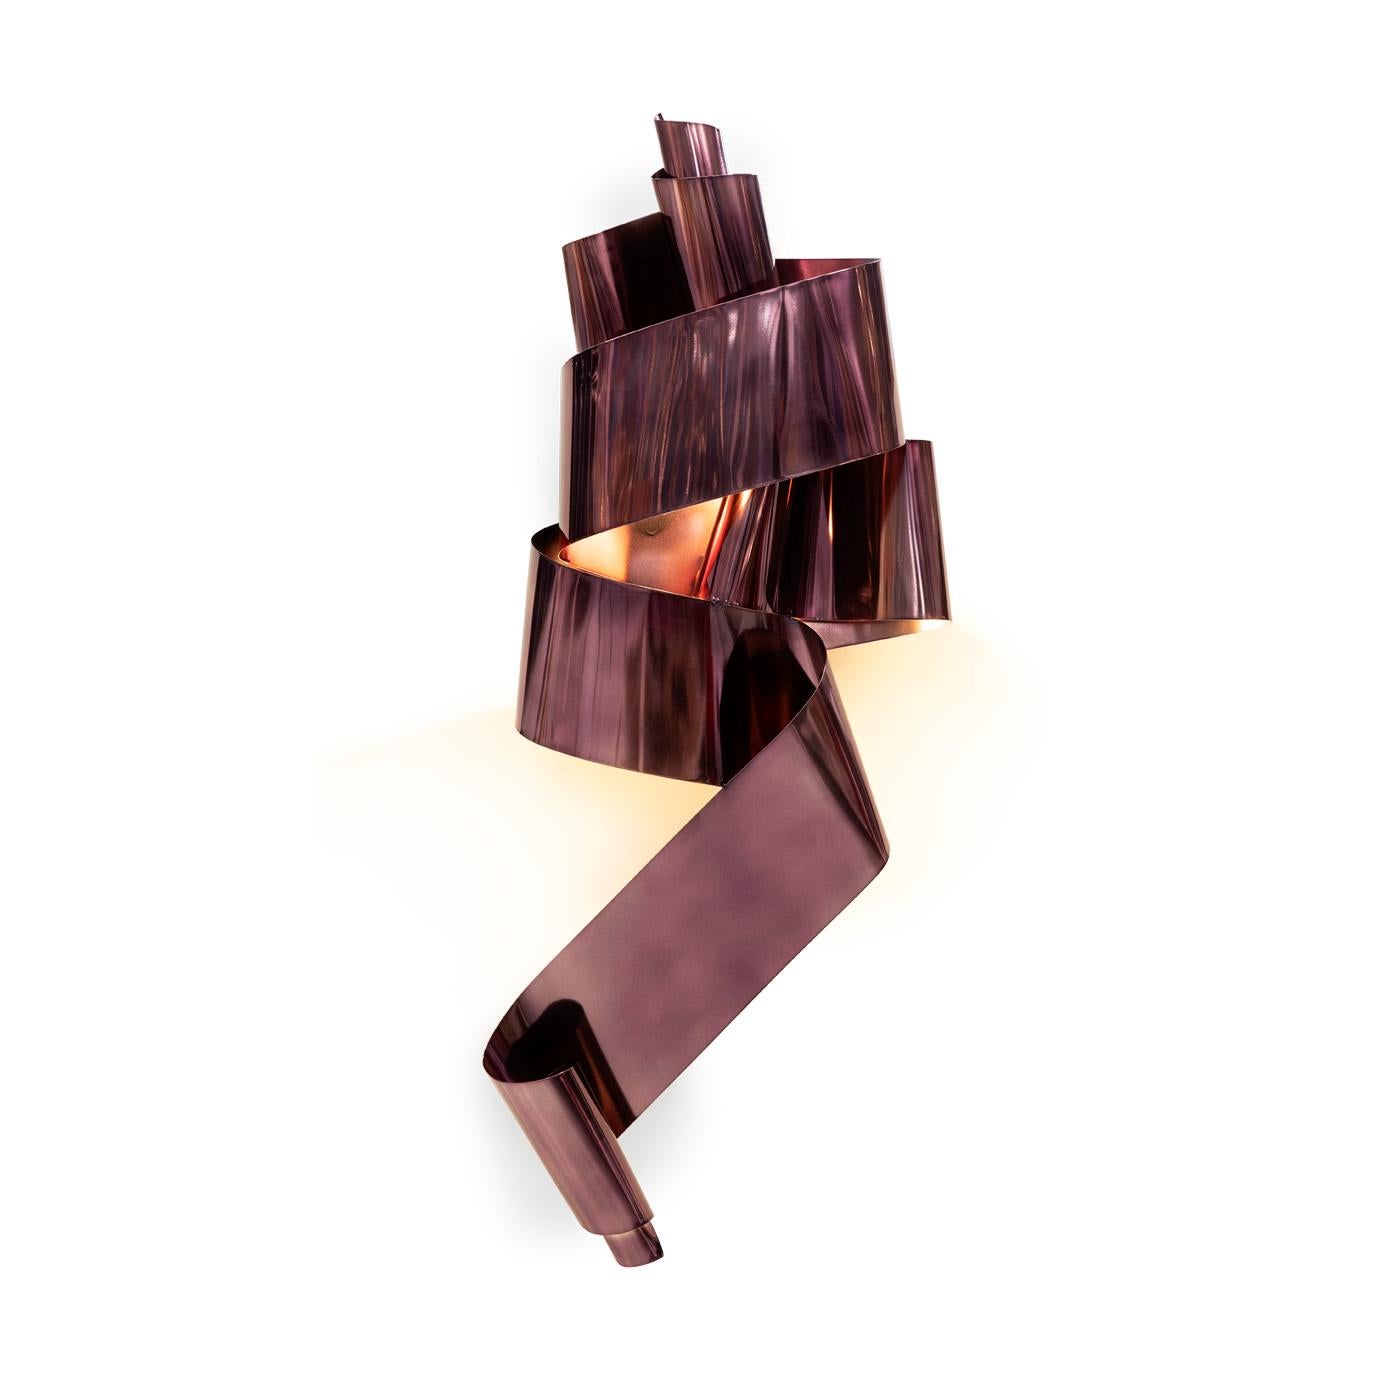 Inspired by the wildly winding anxious mind of a woman suspecting something is off-kilter, the oversized ribbon-like Neurotica sconce, alone, in a pair or down a hall, serves as powerful art and lighting.